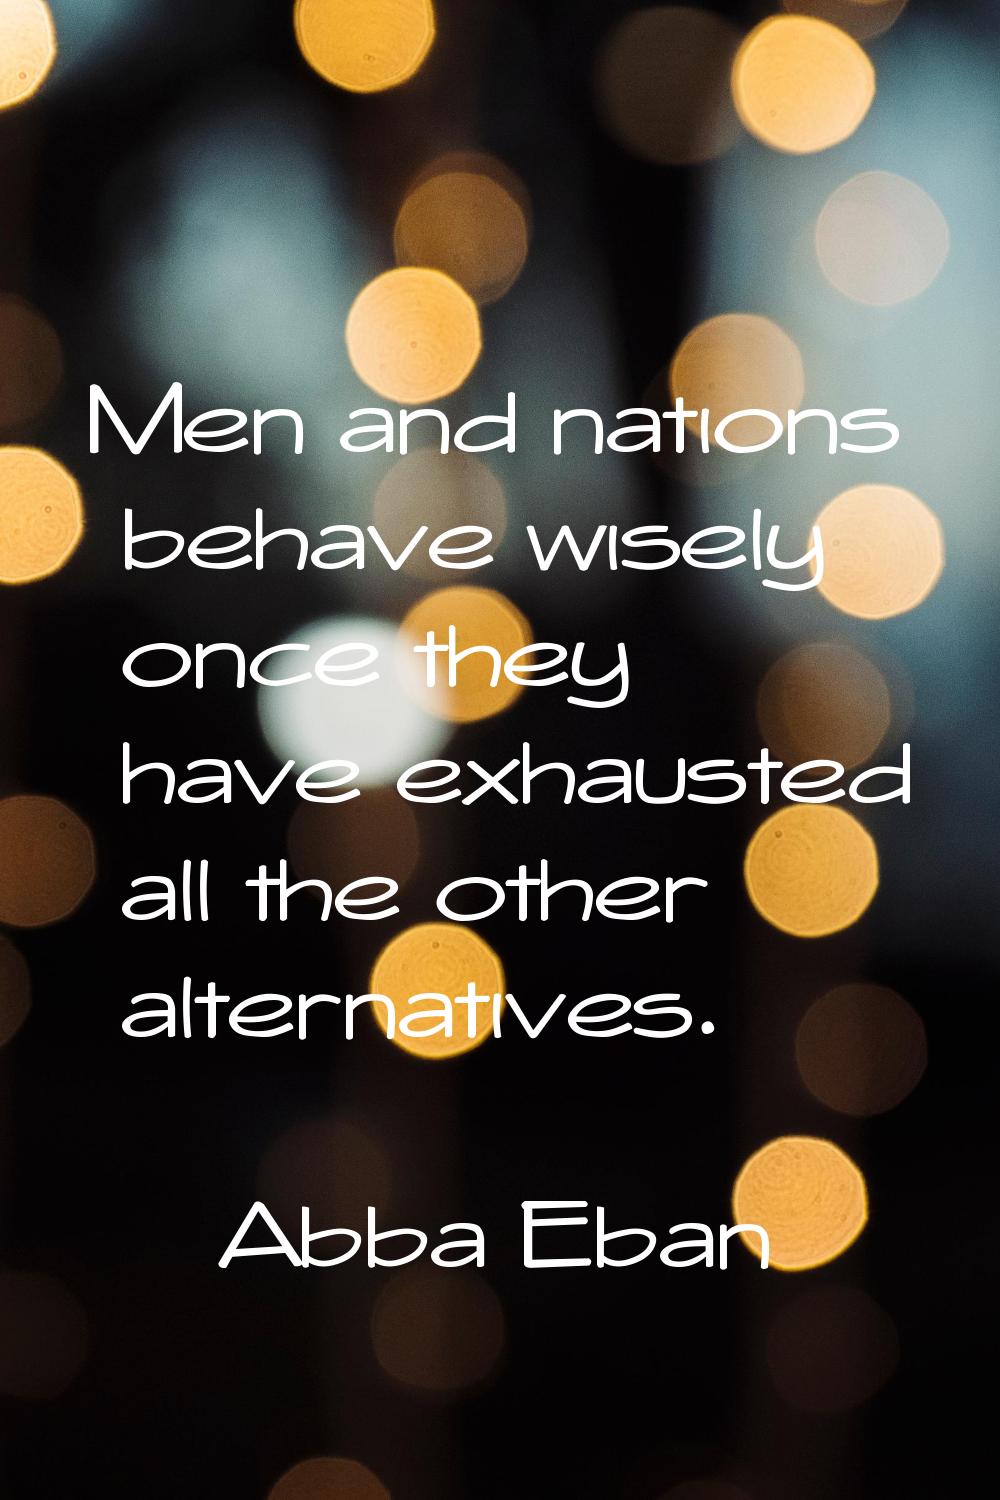 Men and nations behave wisely once they have exhausted all the other alternatives.